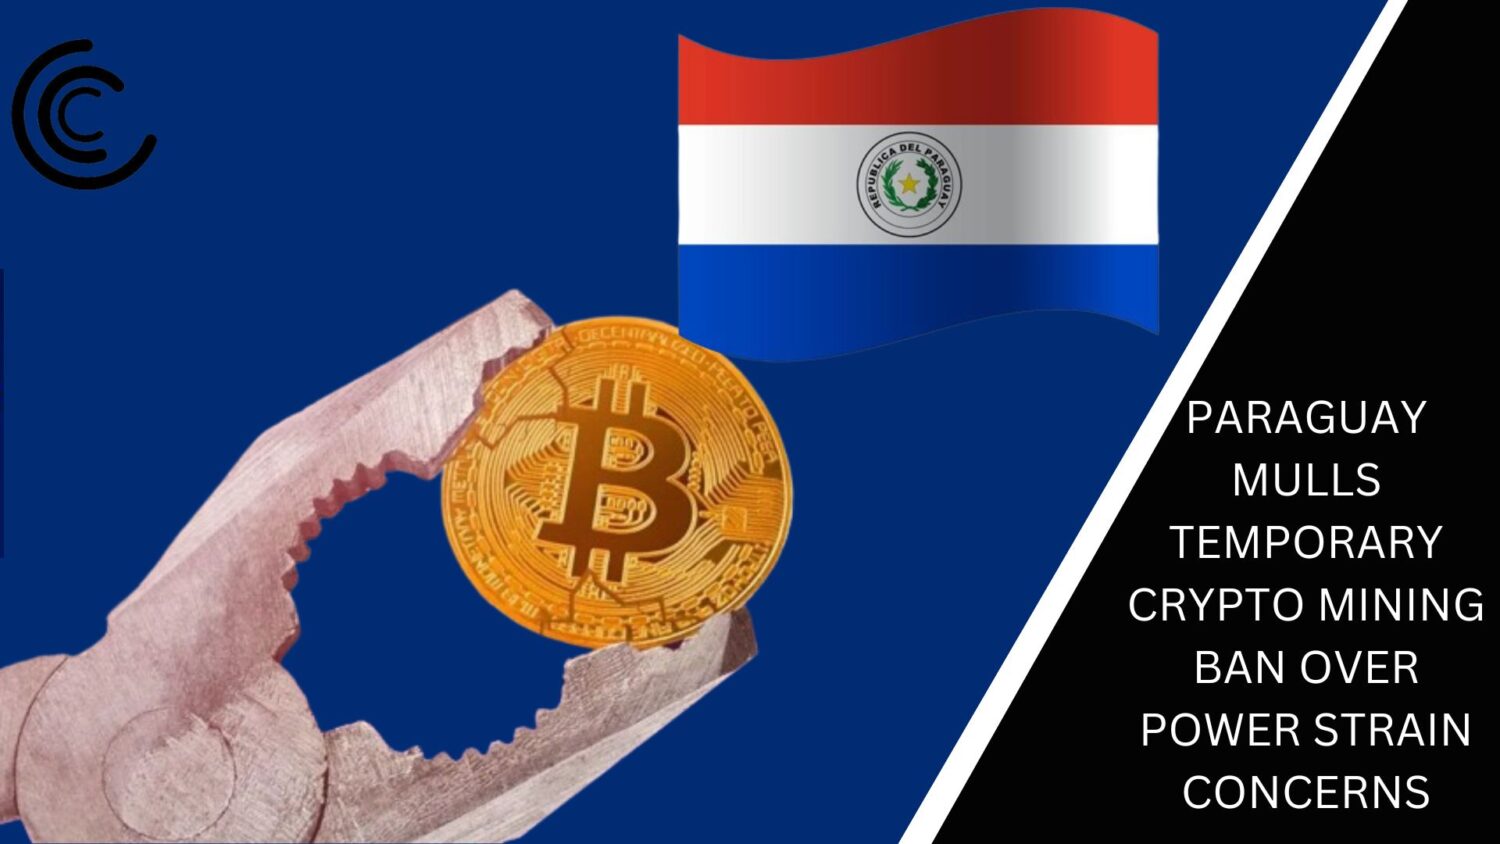 Paraguay Mulls Temporary Crypto Mining Ban Over Power Strain Concerns